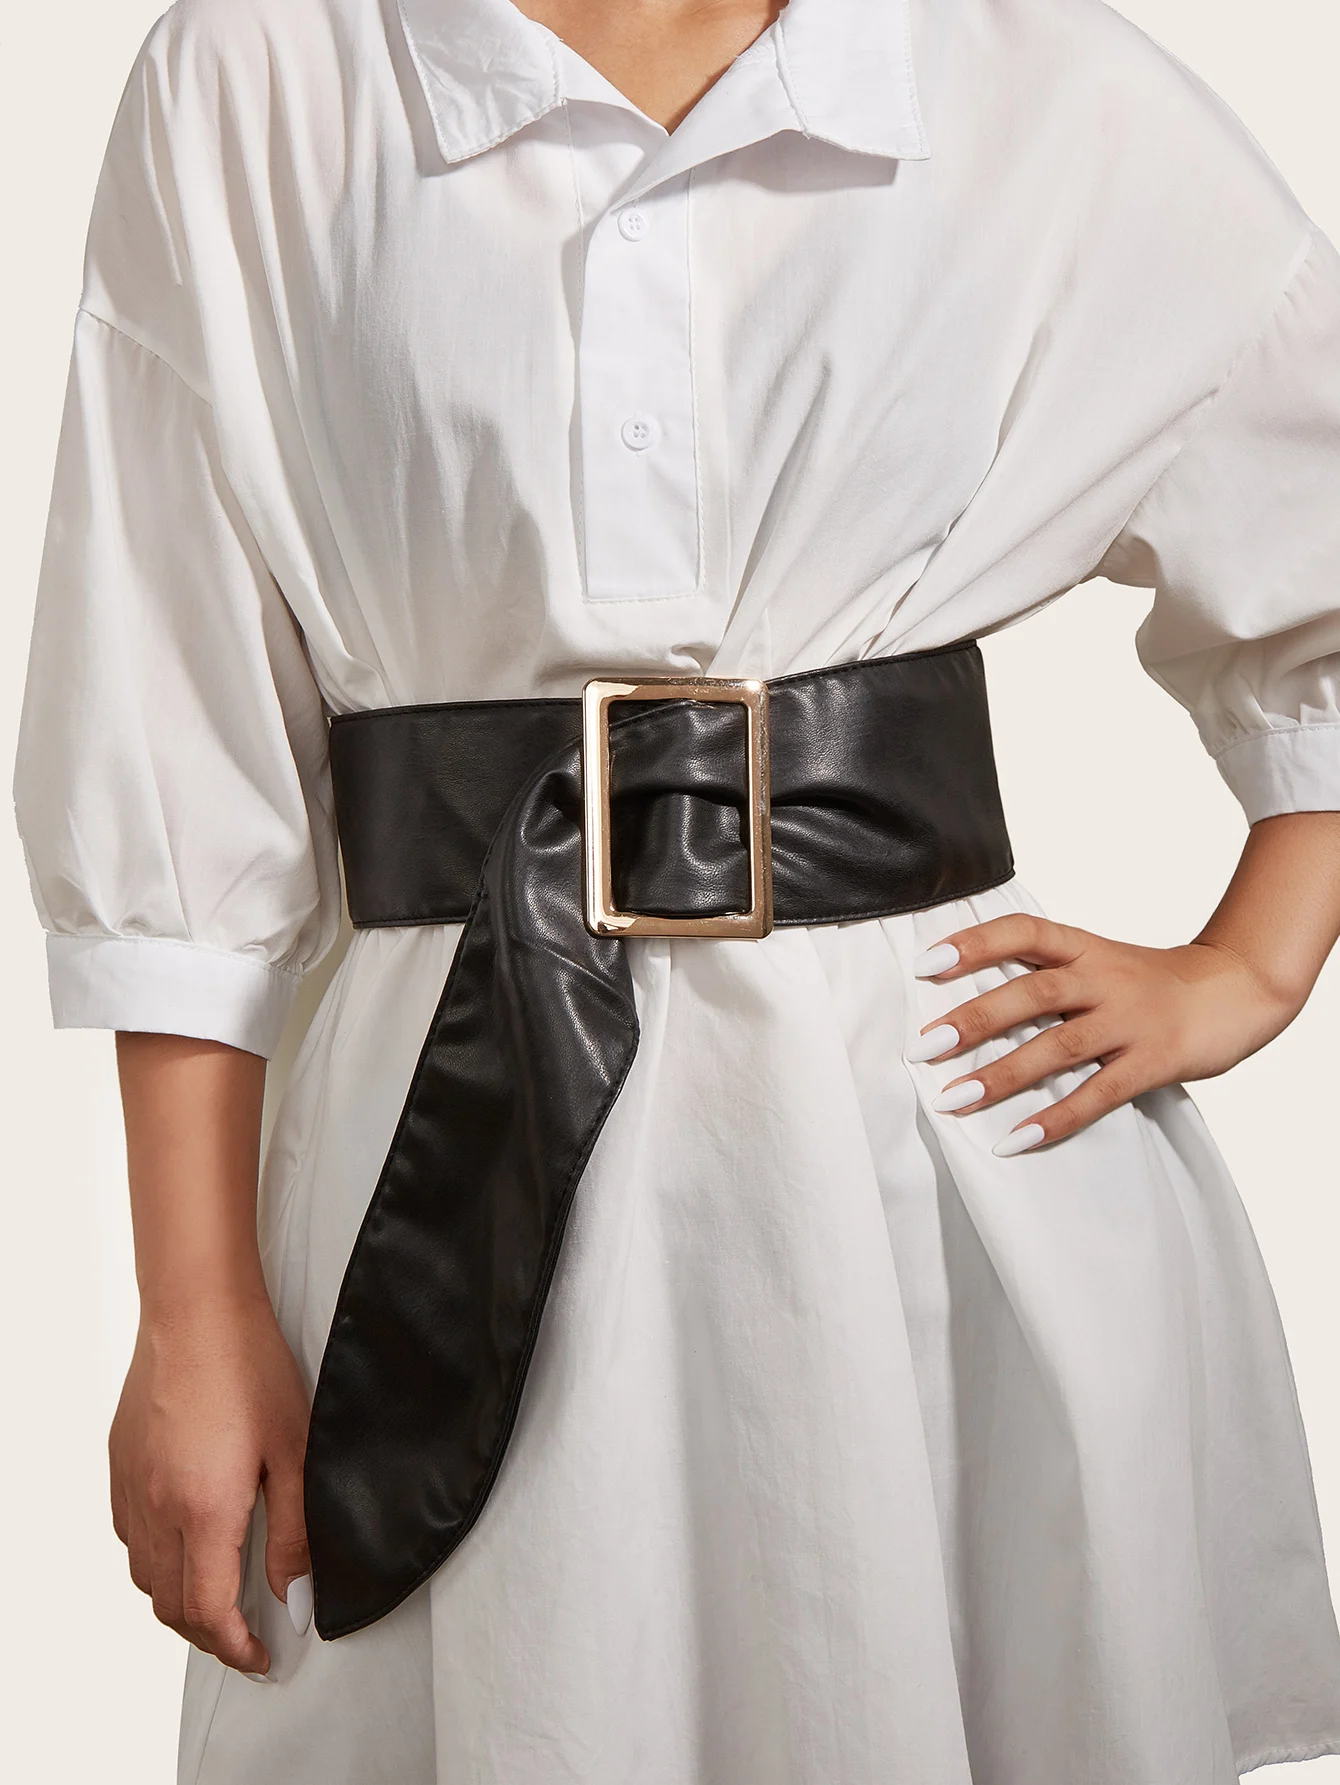 Designer Brand European And American Style Women's Metal Square Buckle Pu Fashion Trend With Wide Belt Waist Soft Girdle